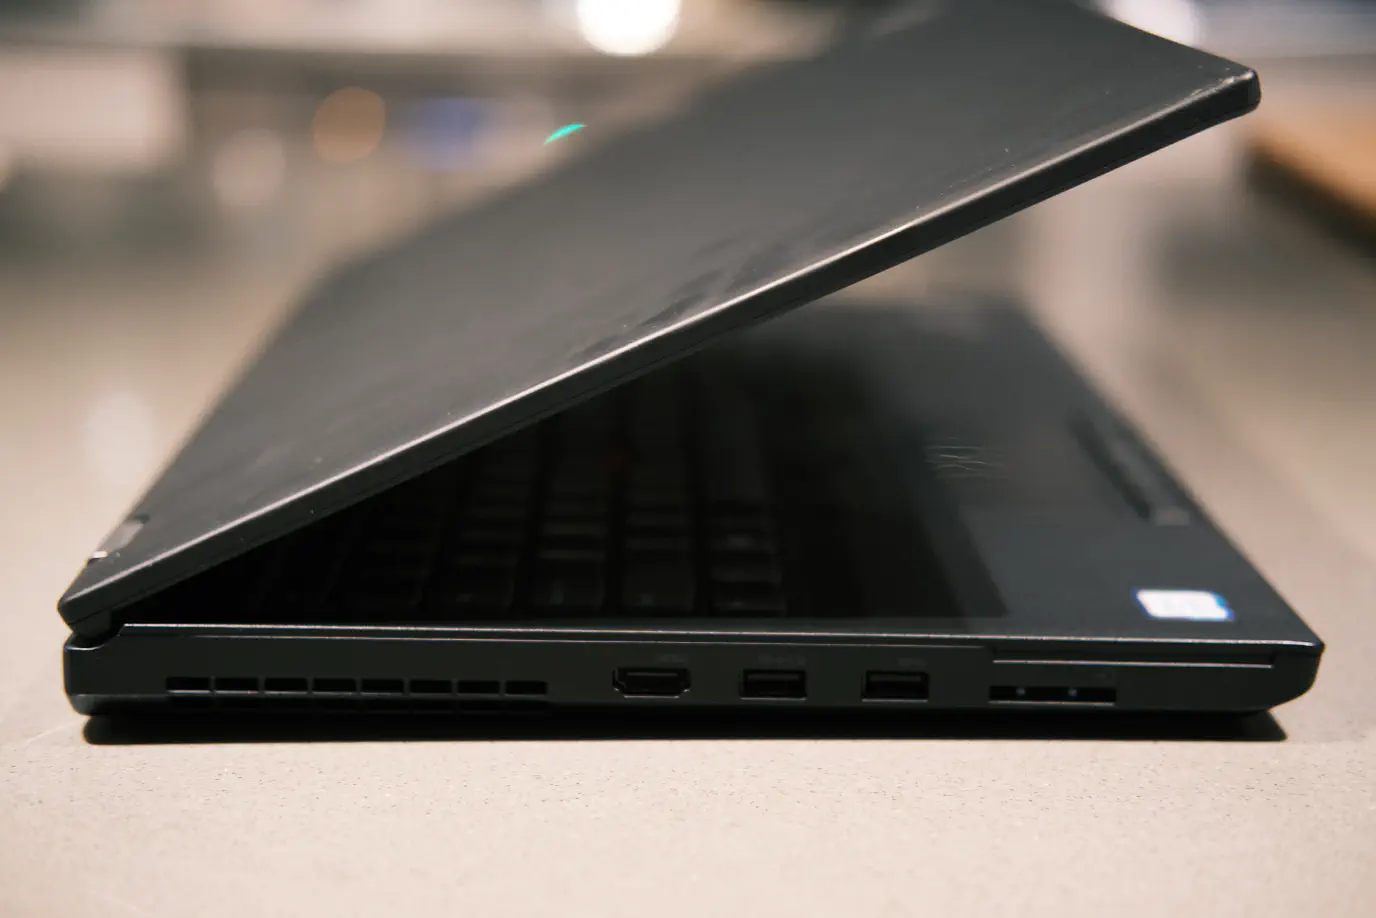 The left side of a ThinkPad P53 with the display opened to about 30 degrees